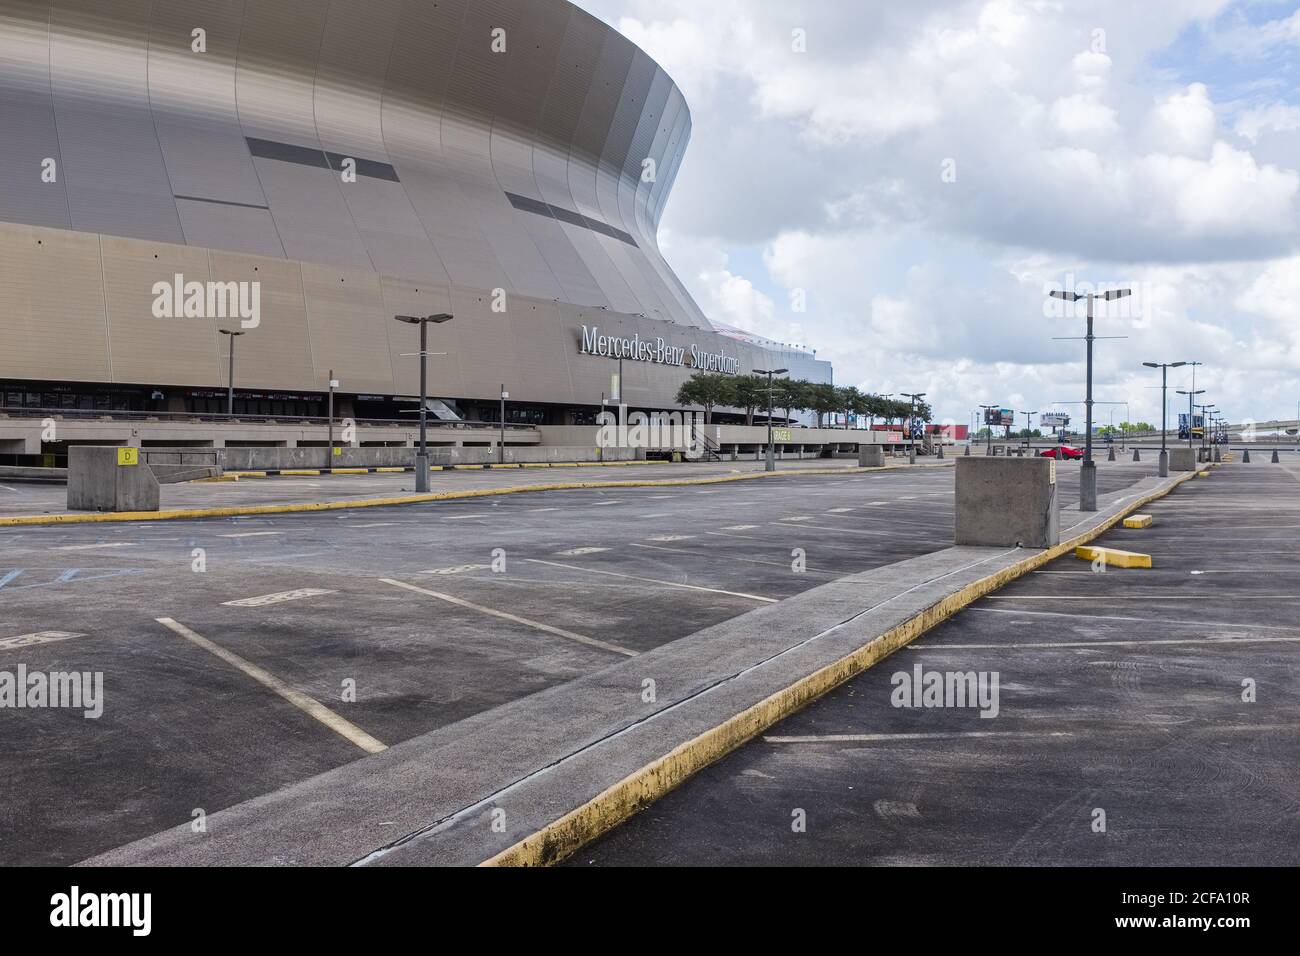 New Orleans, Louisiana/USA - 8/29/2020: Mercedes-Benz Superdome and Parking Lot Stock Photo